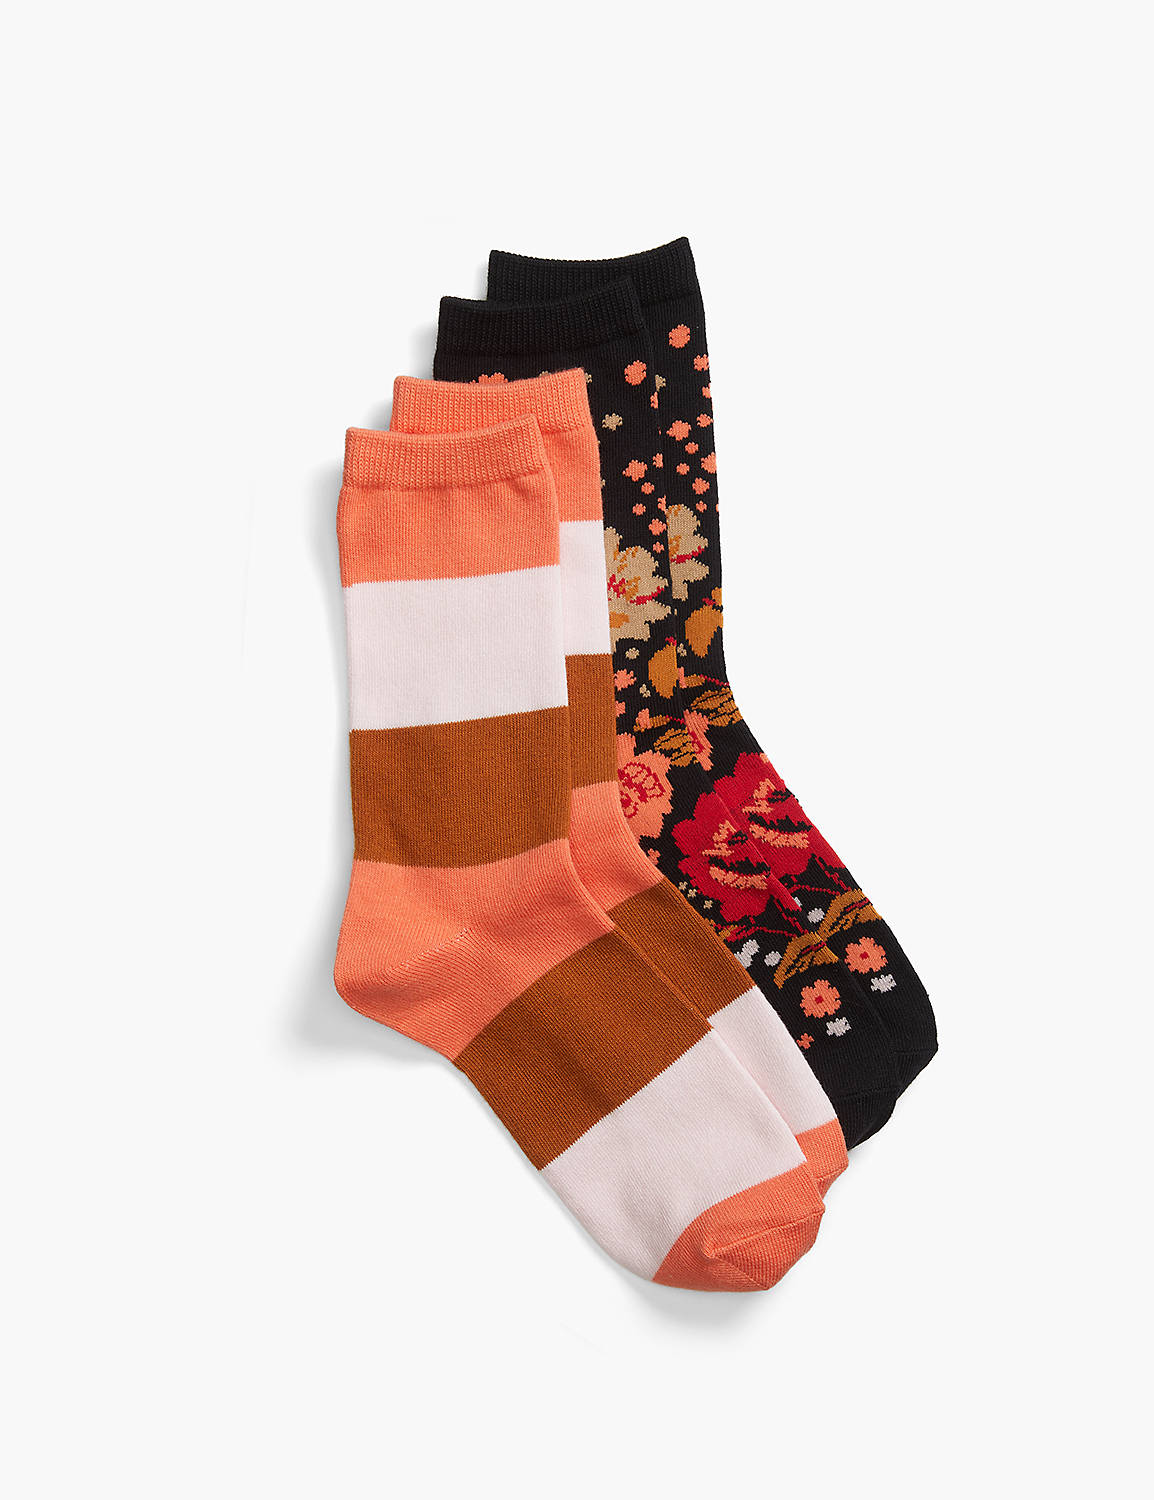 2-Pack Crew Socks - Floral & Stripes Product Image 1